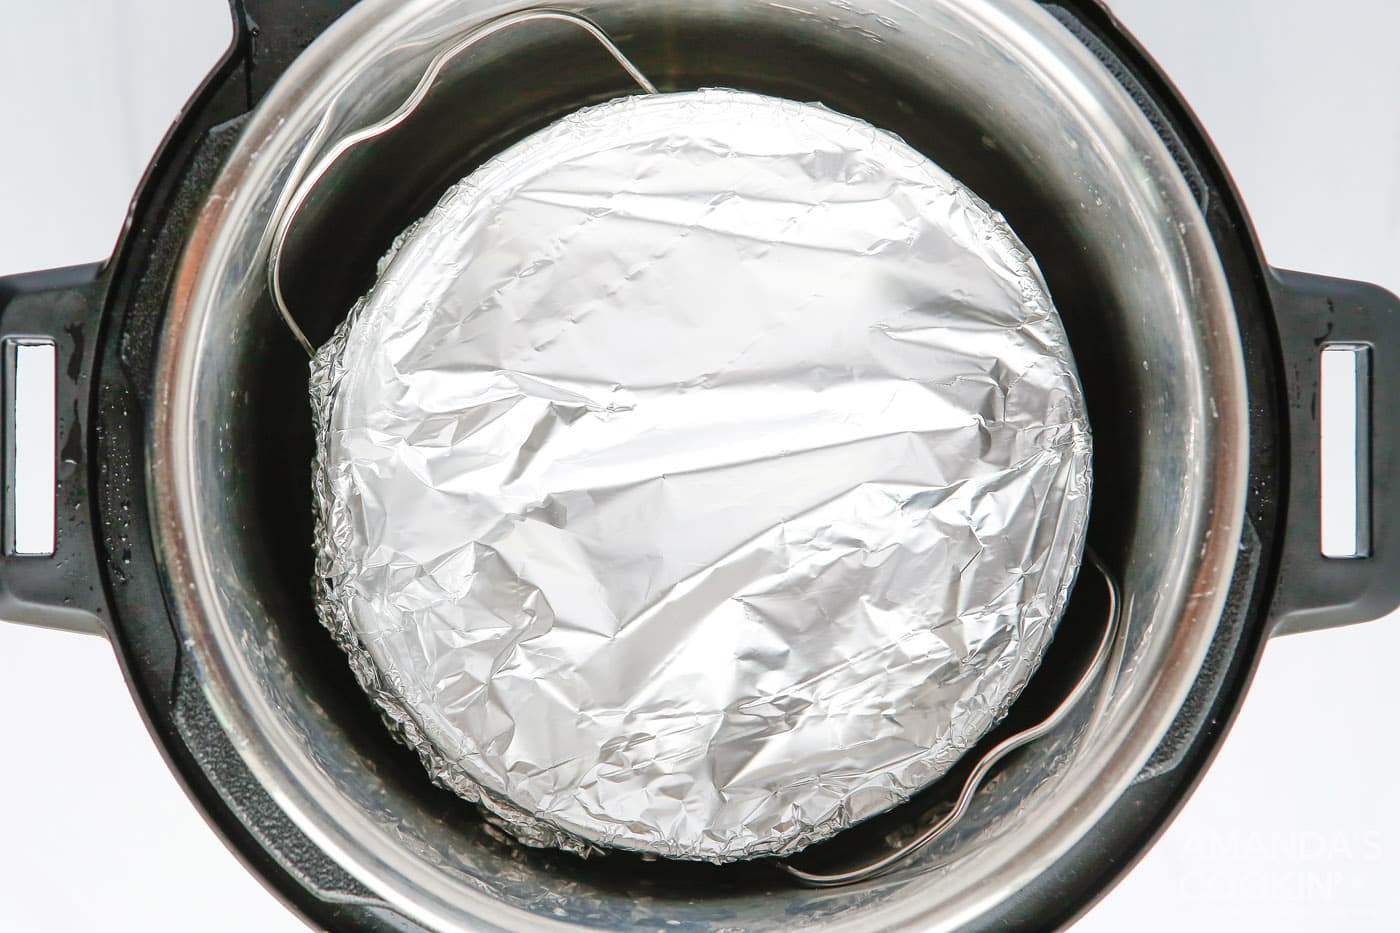 cheesecake wrapped in aluminum foil in the instant pot